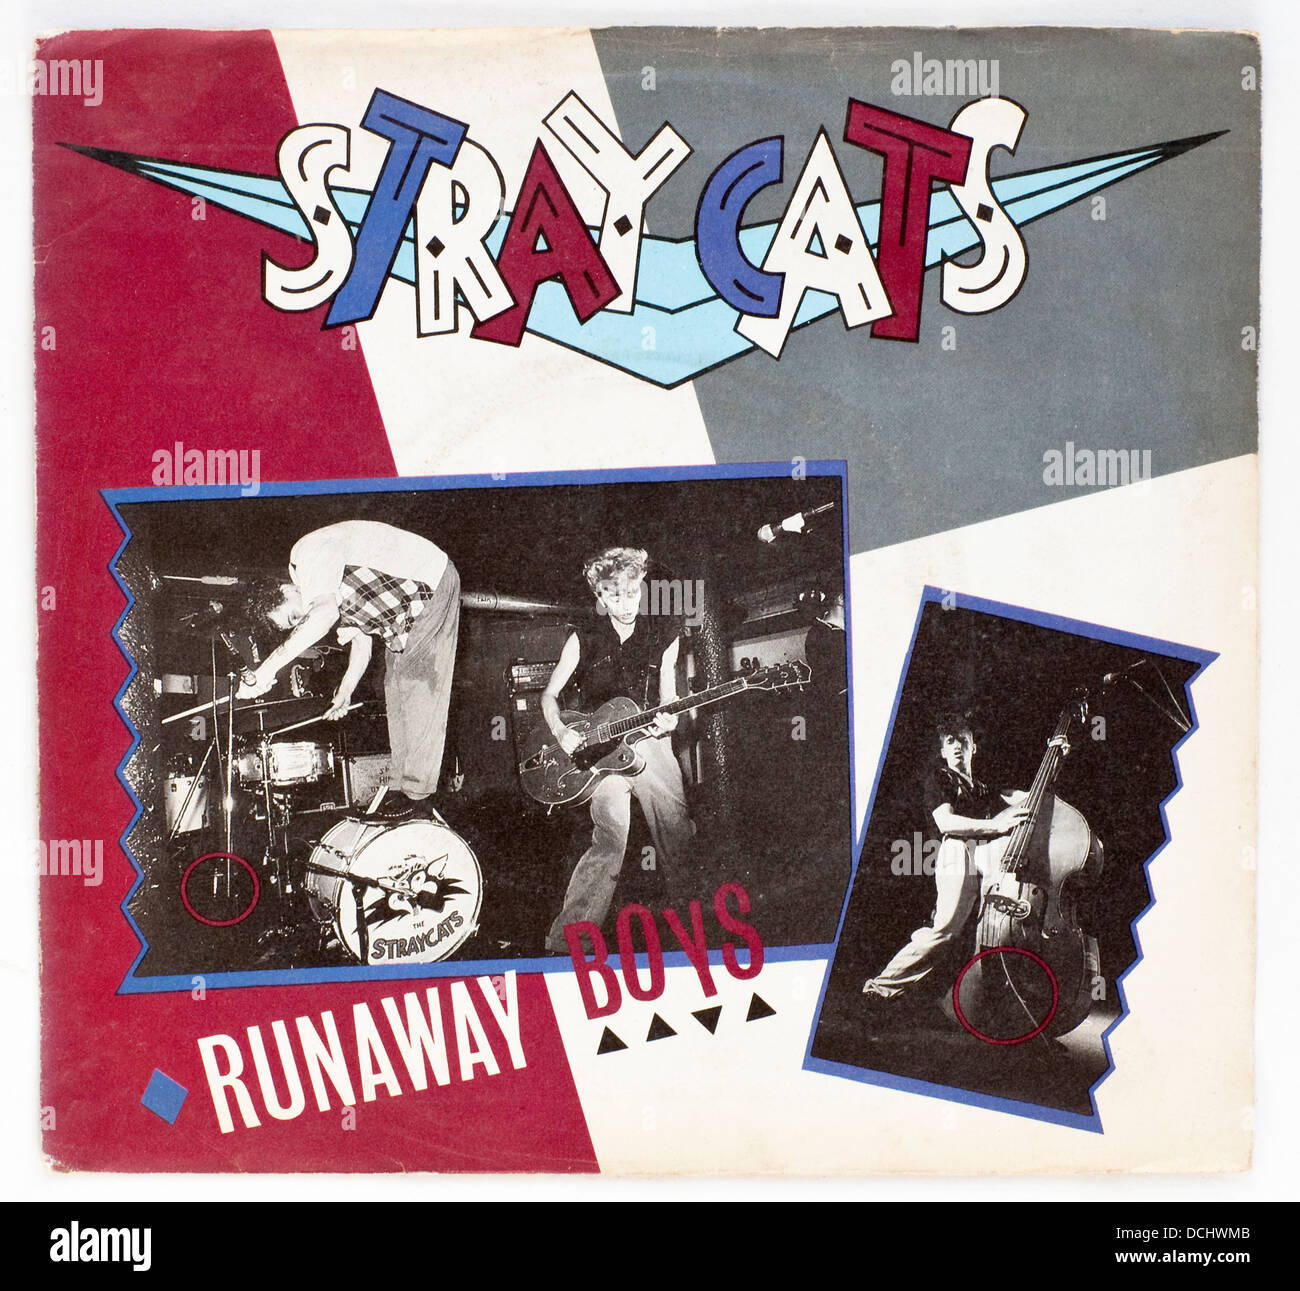 The Stray Cats - Runaway Boys, 1980 picture cover single on Arista Records - Editorial use only Stock Photo